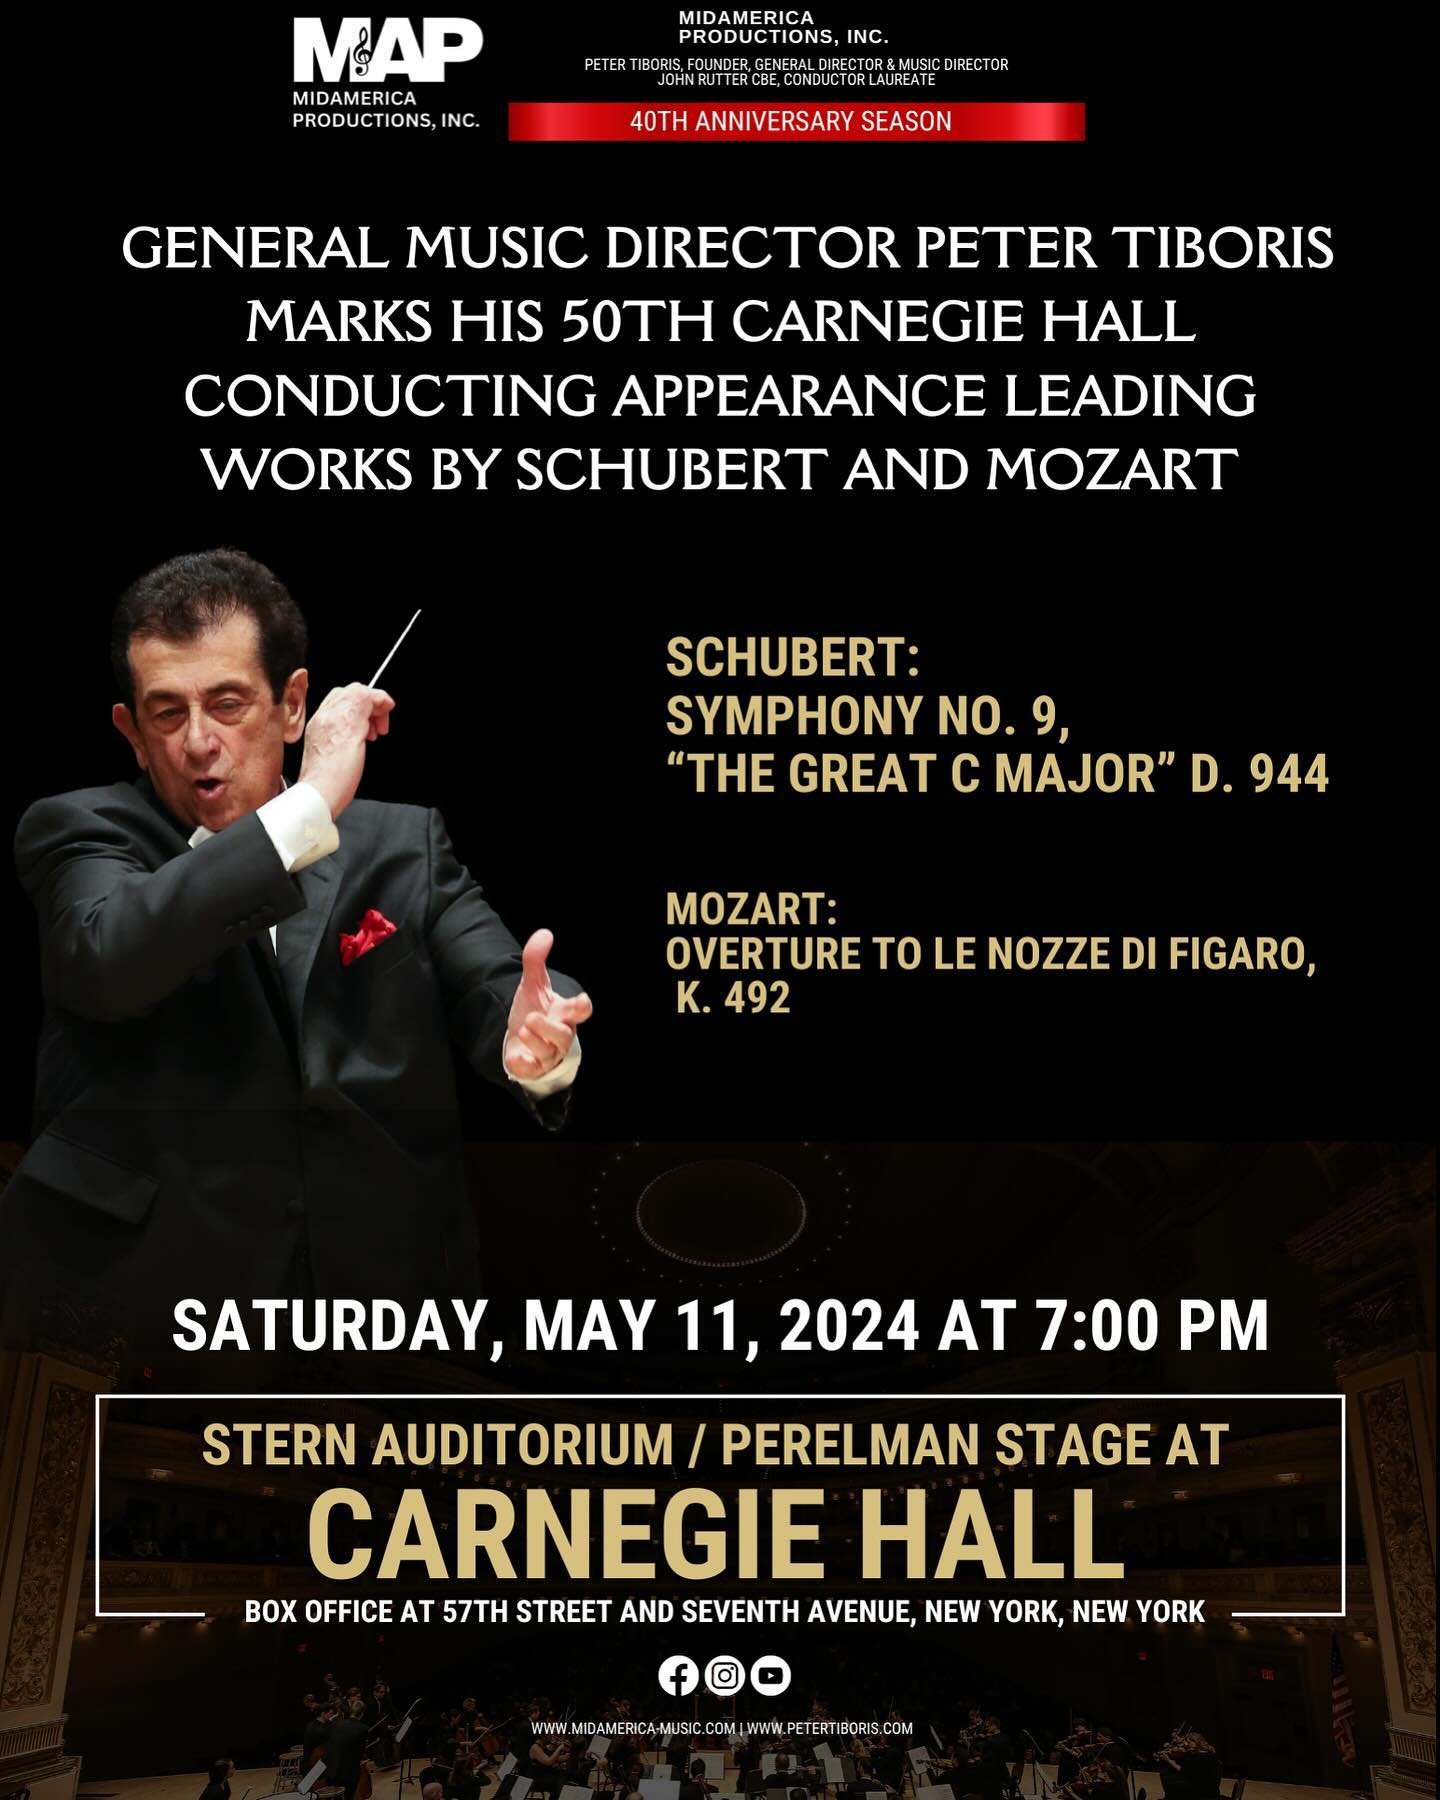 THIS SATURDAY marks MidAmerica Productions&rsquo; Founder and General Music Director Peter Tiboris&rsquo; 50th @carnegiehall appearance! ✨🎶 For tickets call CarnegieCharge (212-247-7800) or visit Box Office located at 57th St and 7th Ave #carnegieha